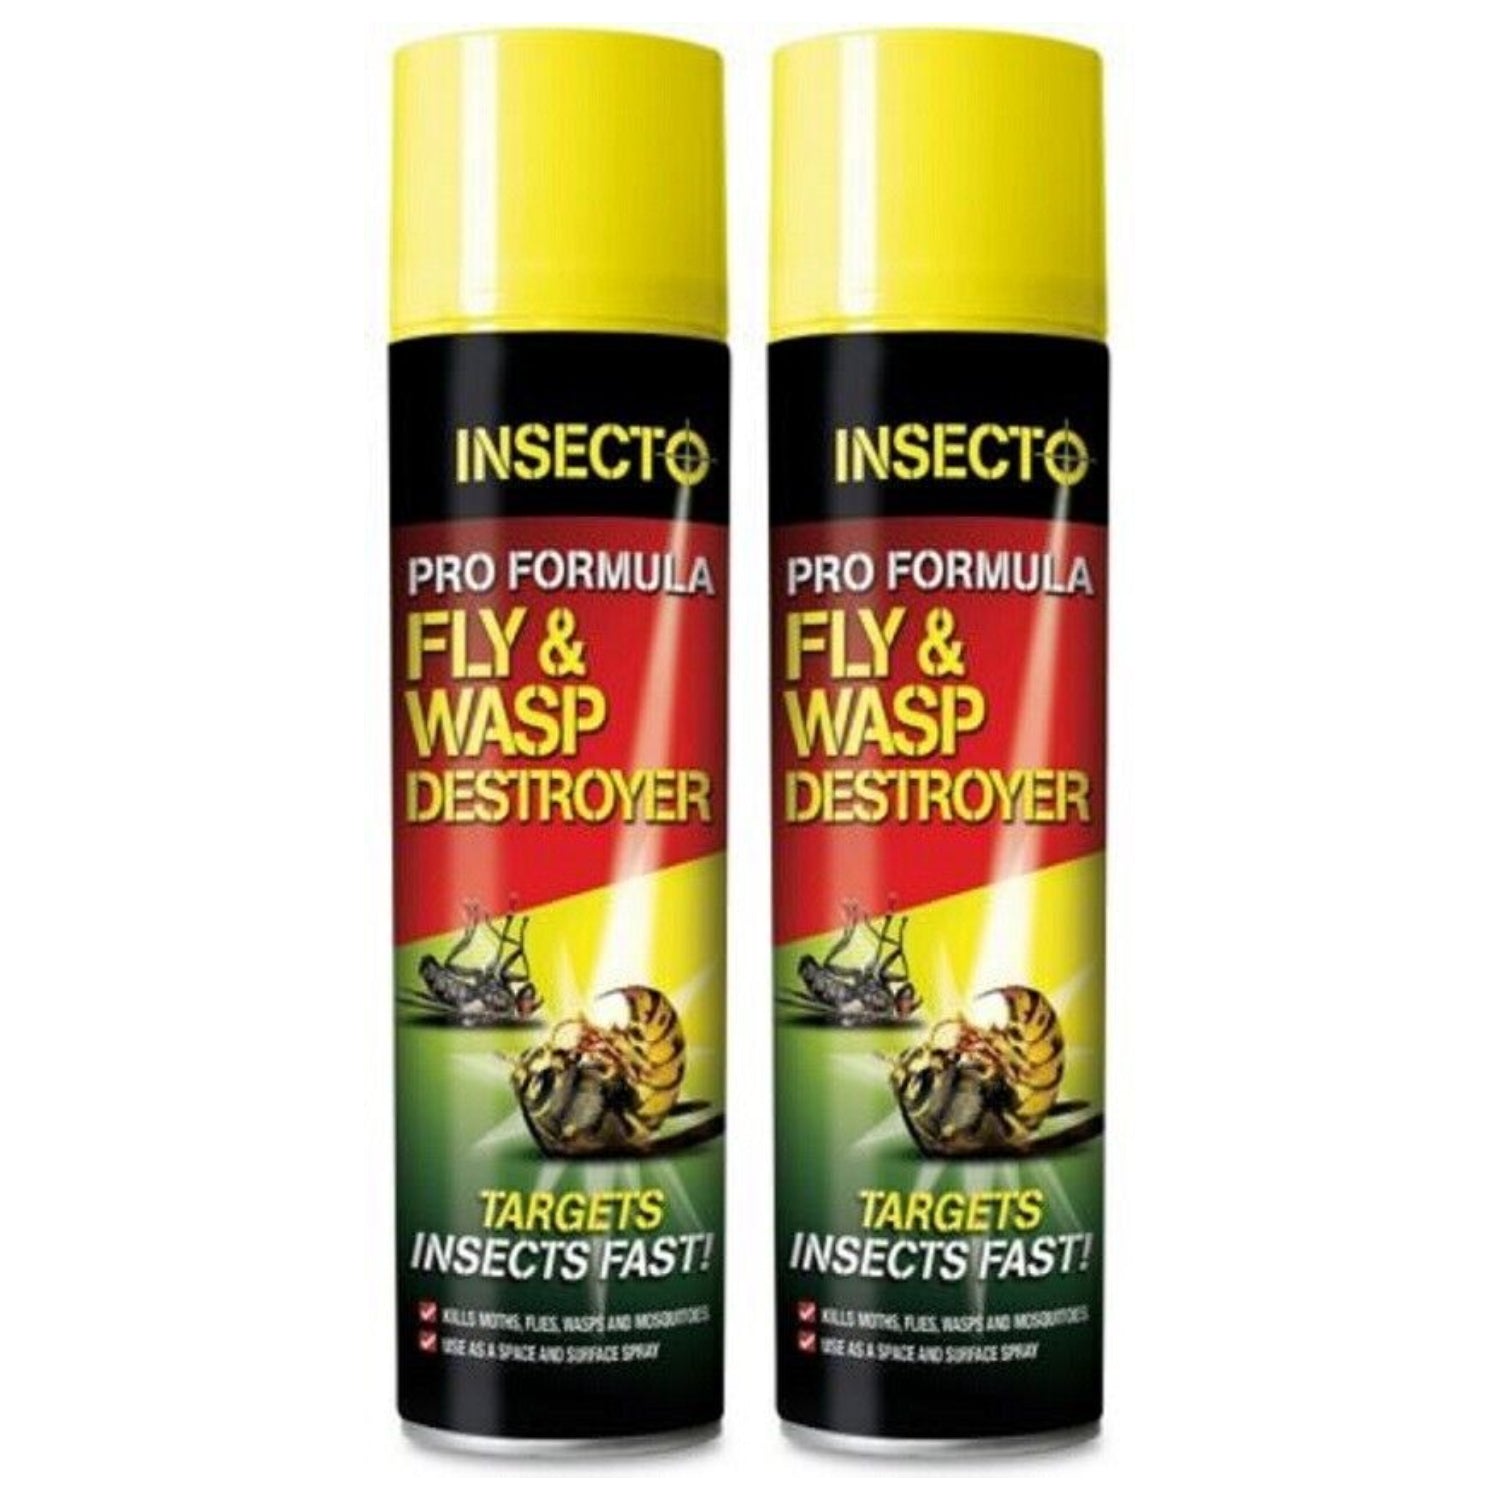 Fly and Wasp Killer Destroyer spray aerosol Kills Flies and other flying insect pests insecto 300ml - Moth Control